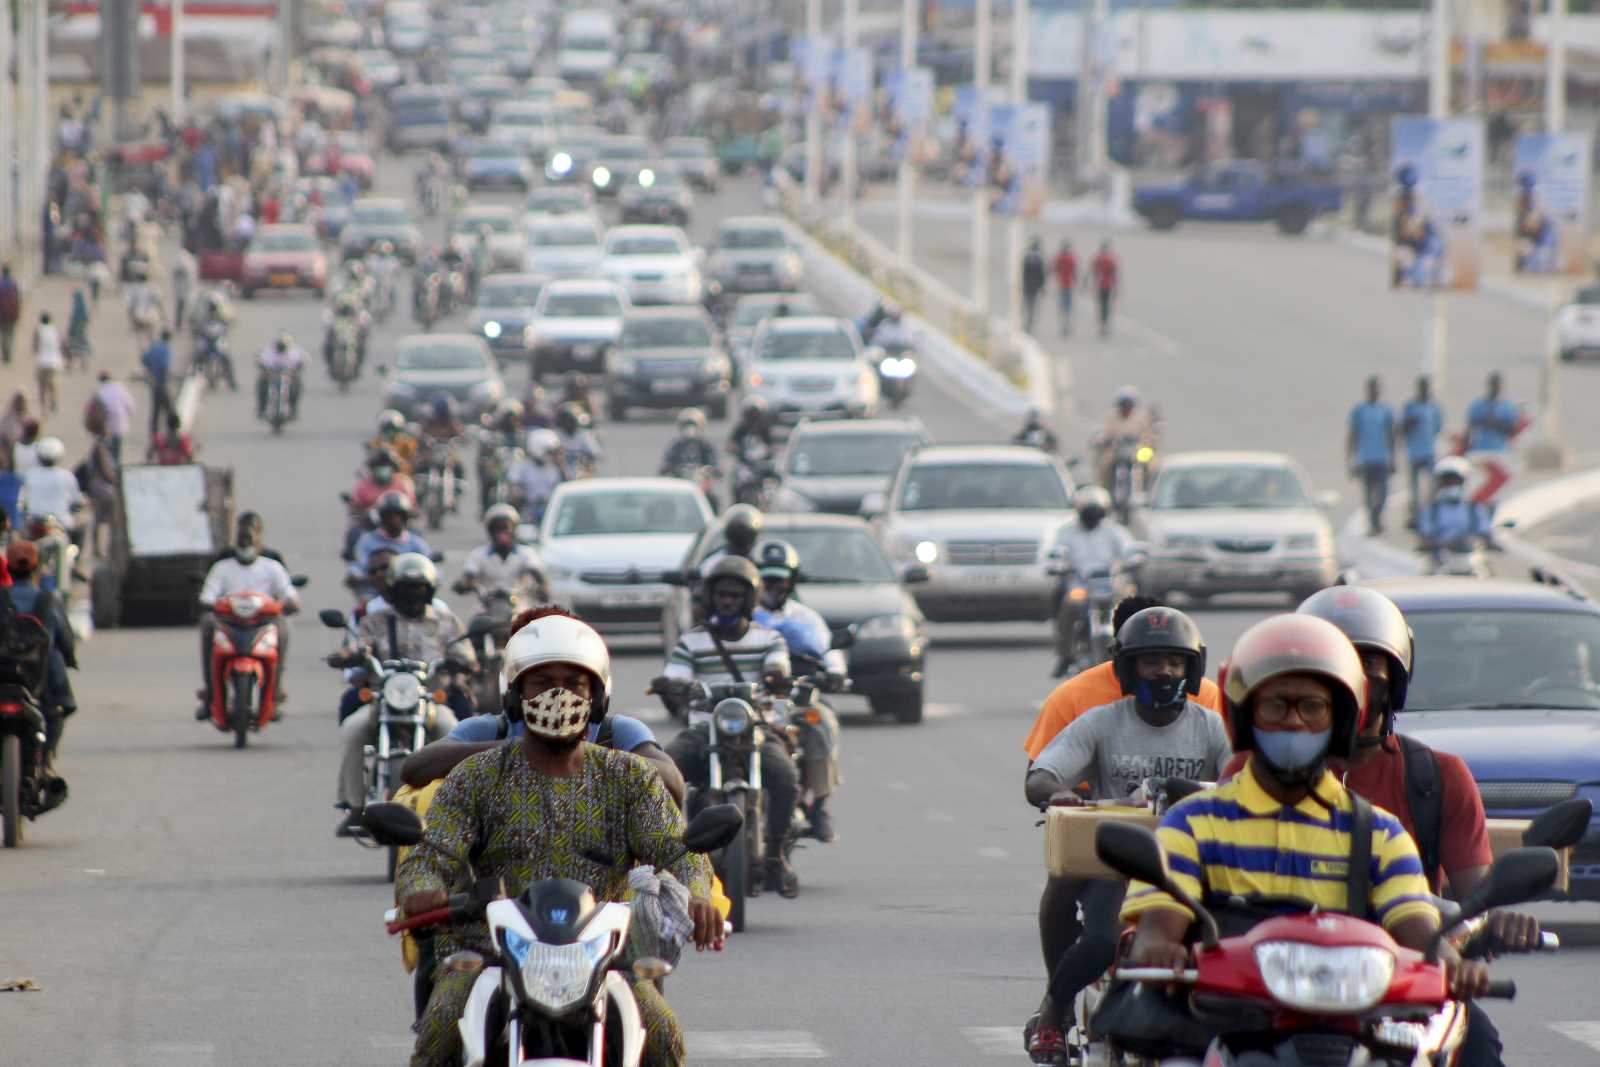 Transport options matter in a pandemic: traffic in Lomé, Togo’s capital, in December 2020.